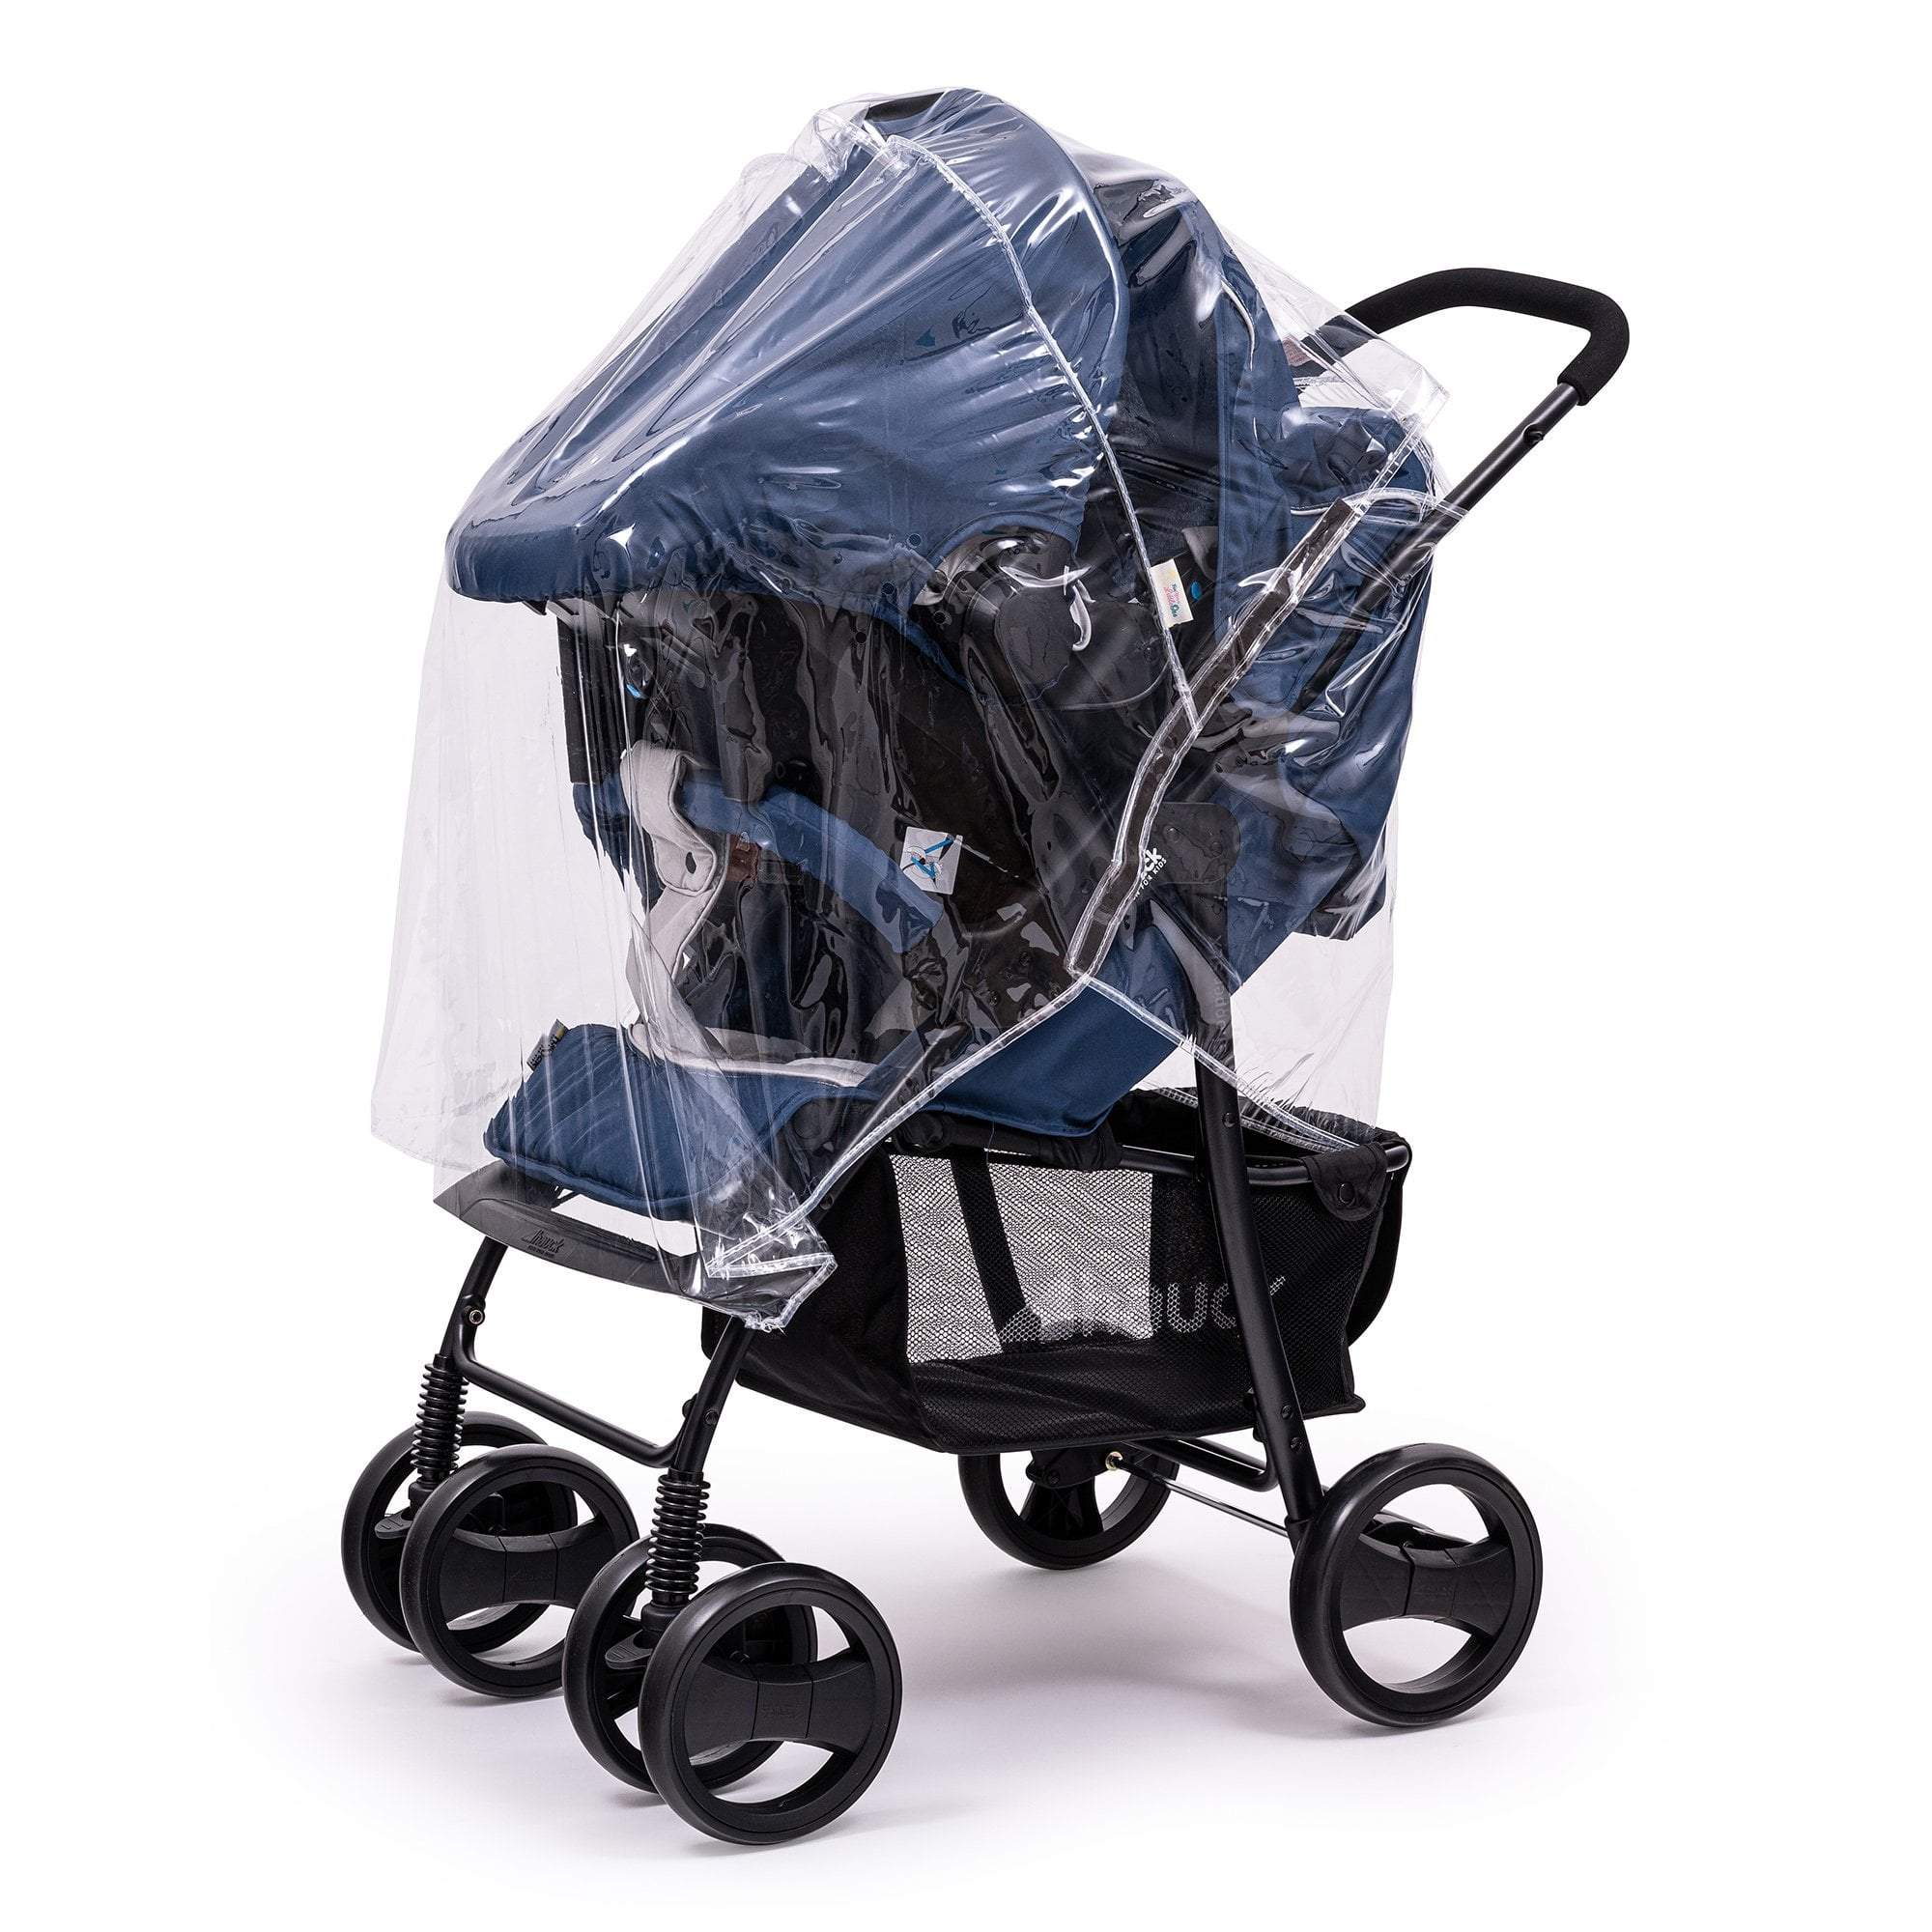 Travel System Raincover Compatible with Teutonia - Fits All Models - For Your Little One